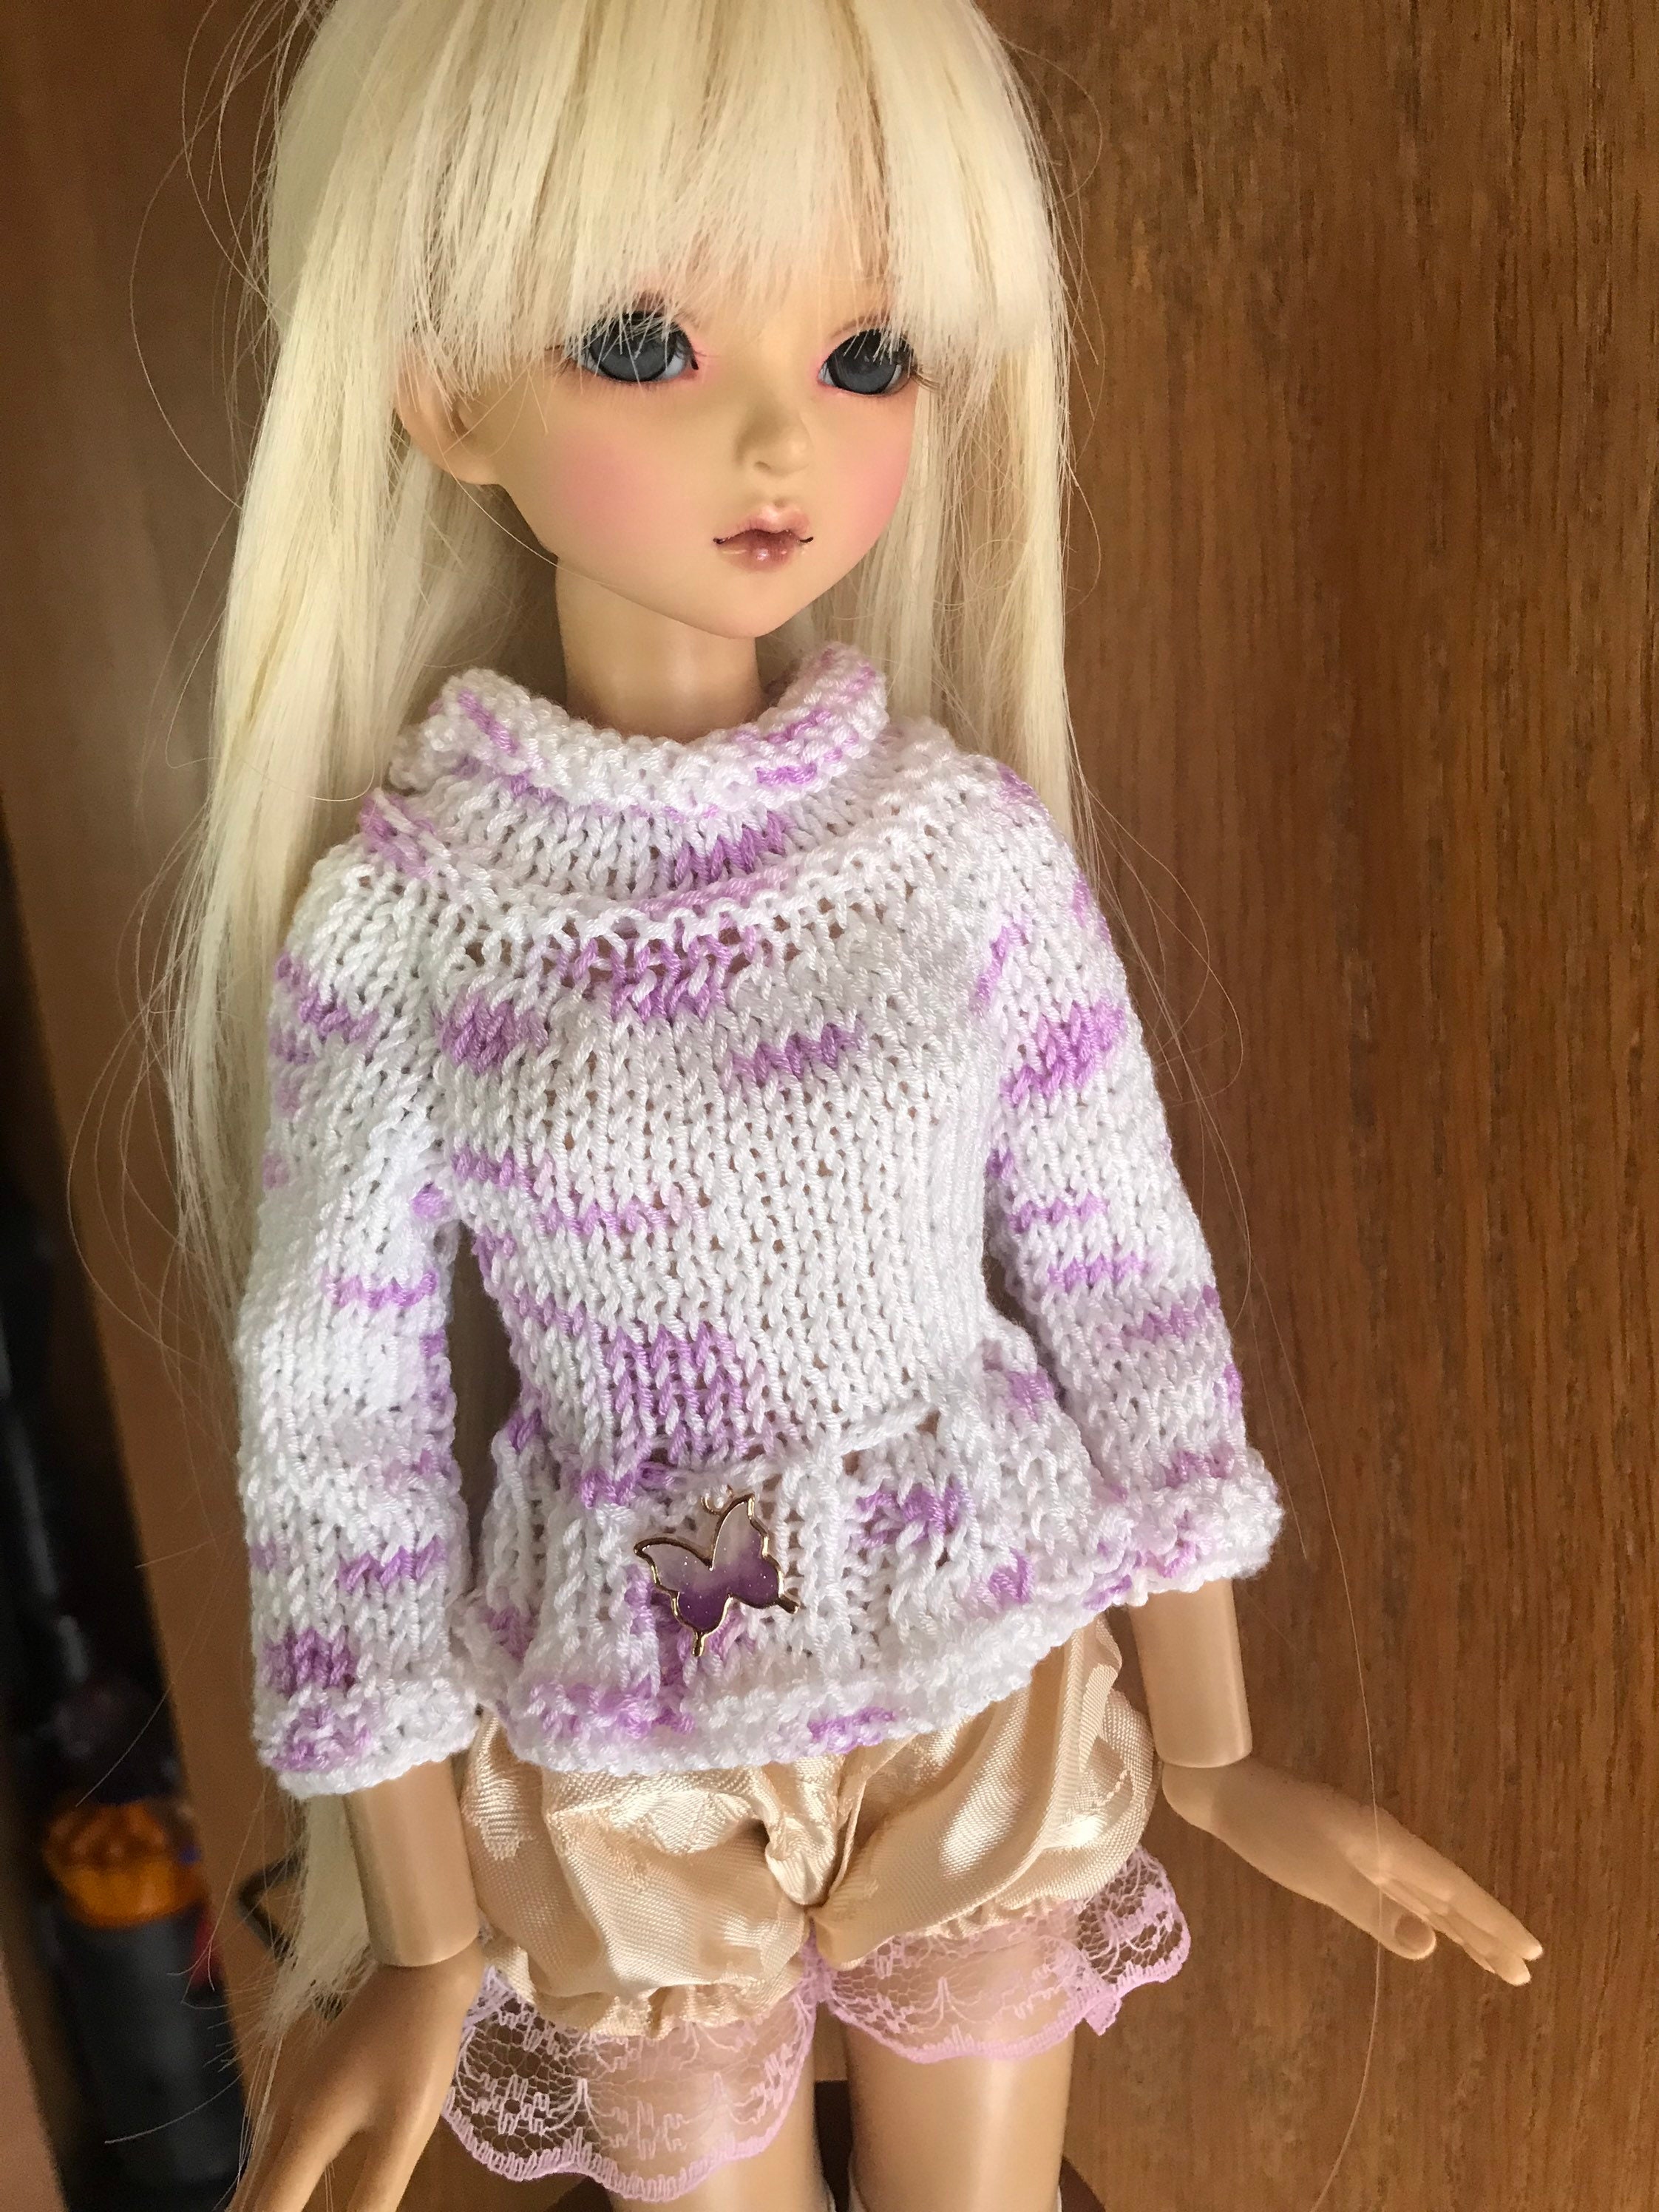 PF Tight Sweater 1/4 MSD DOD BJD Female Doll 50# White Chest Sports Sweater 